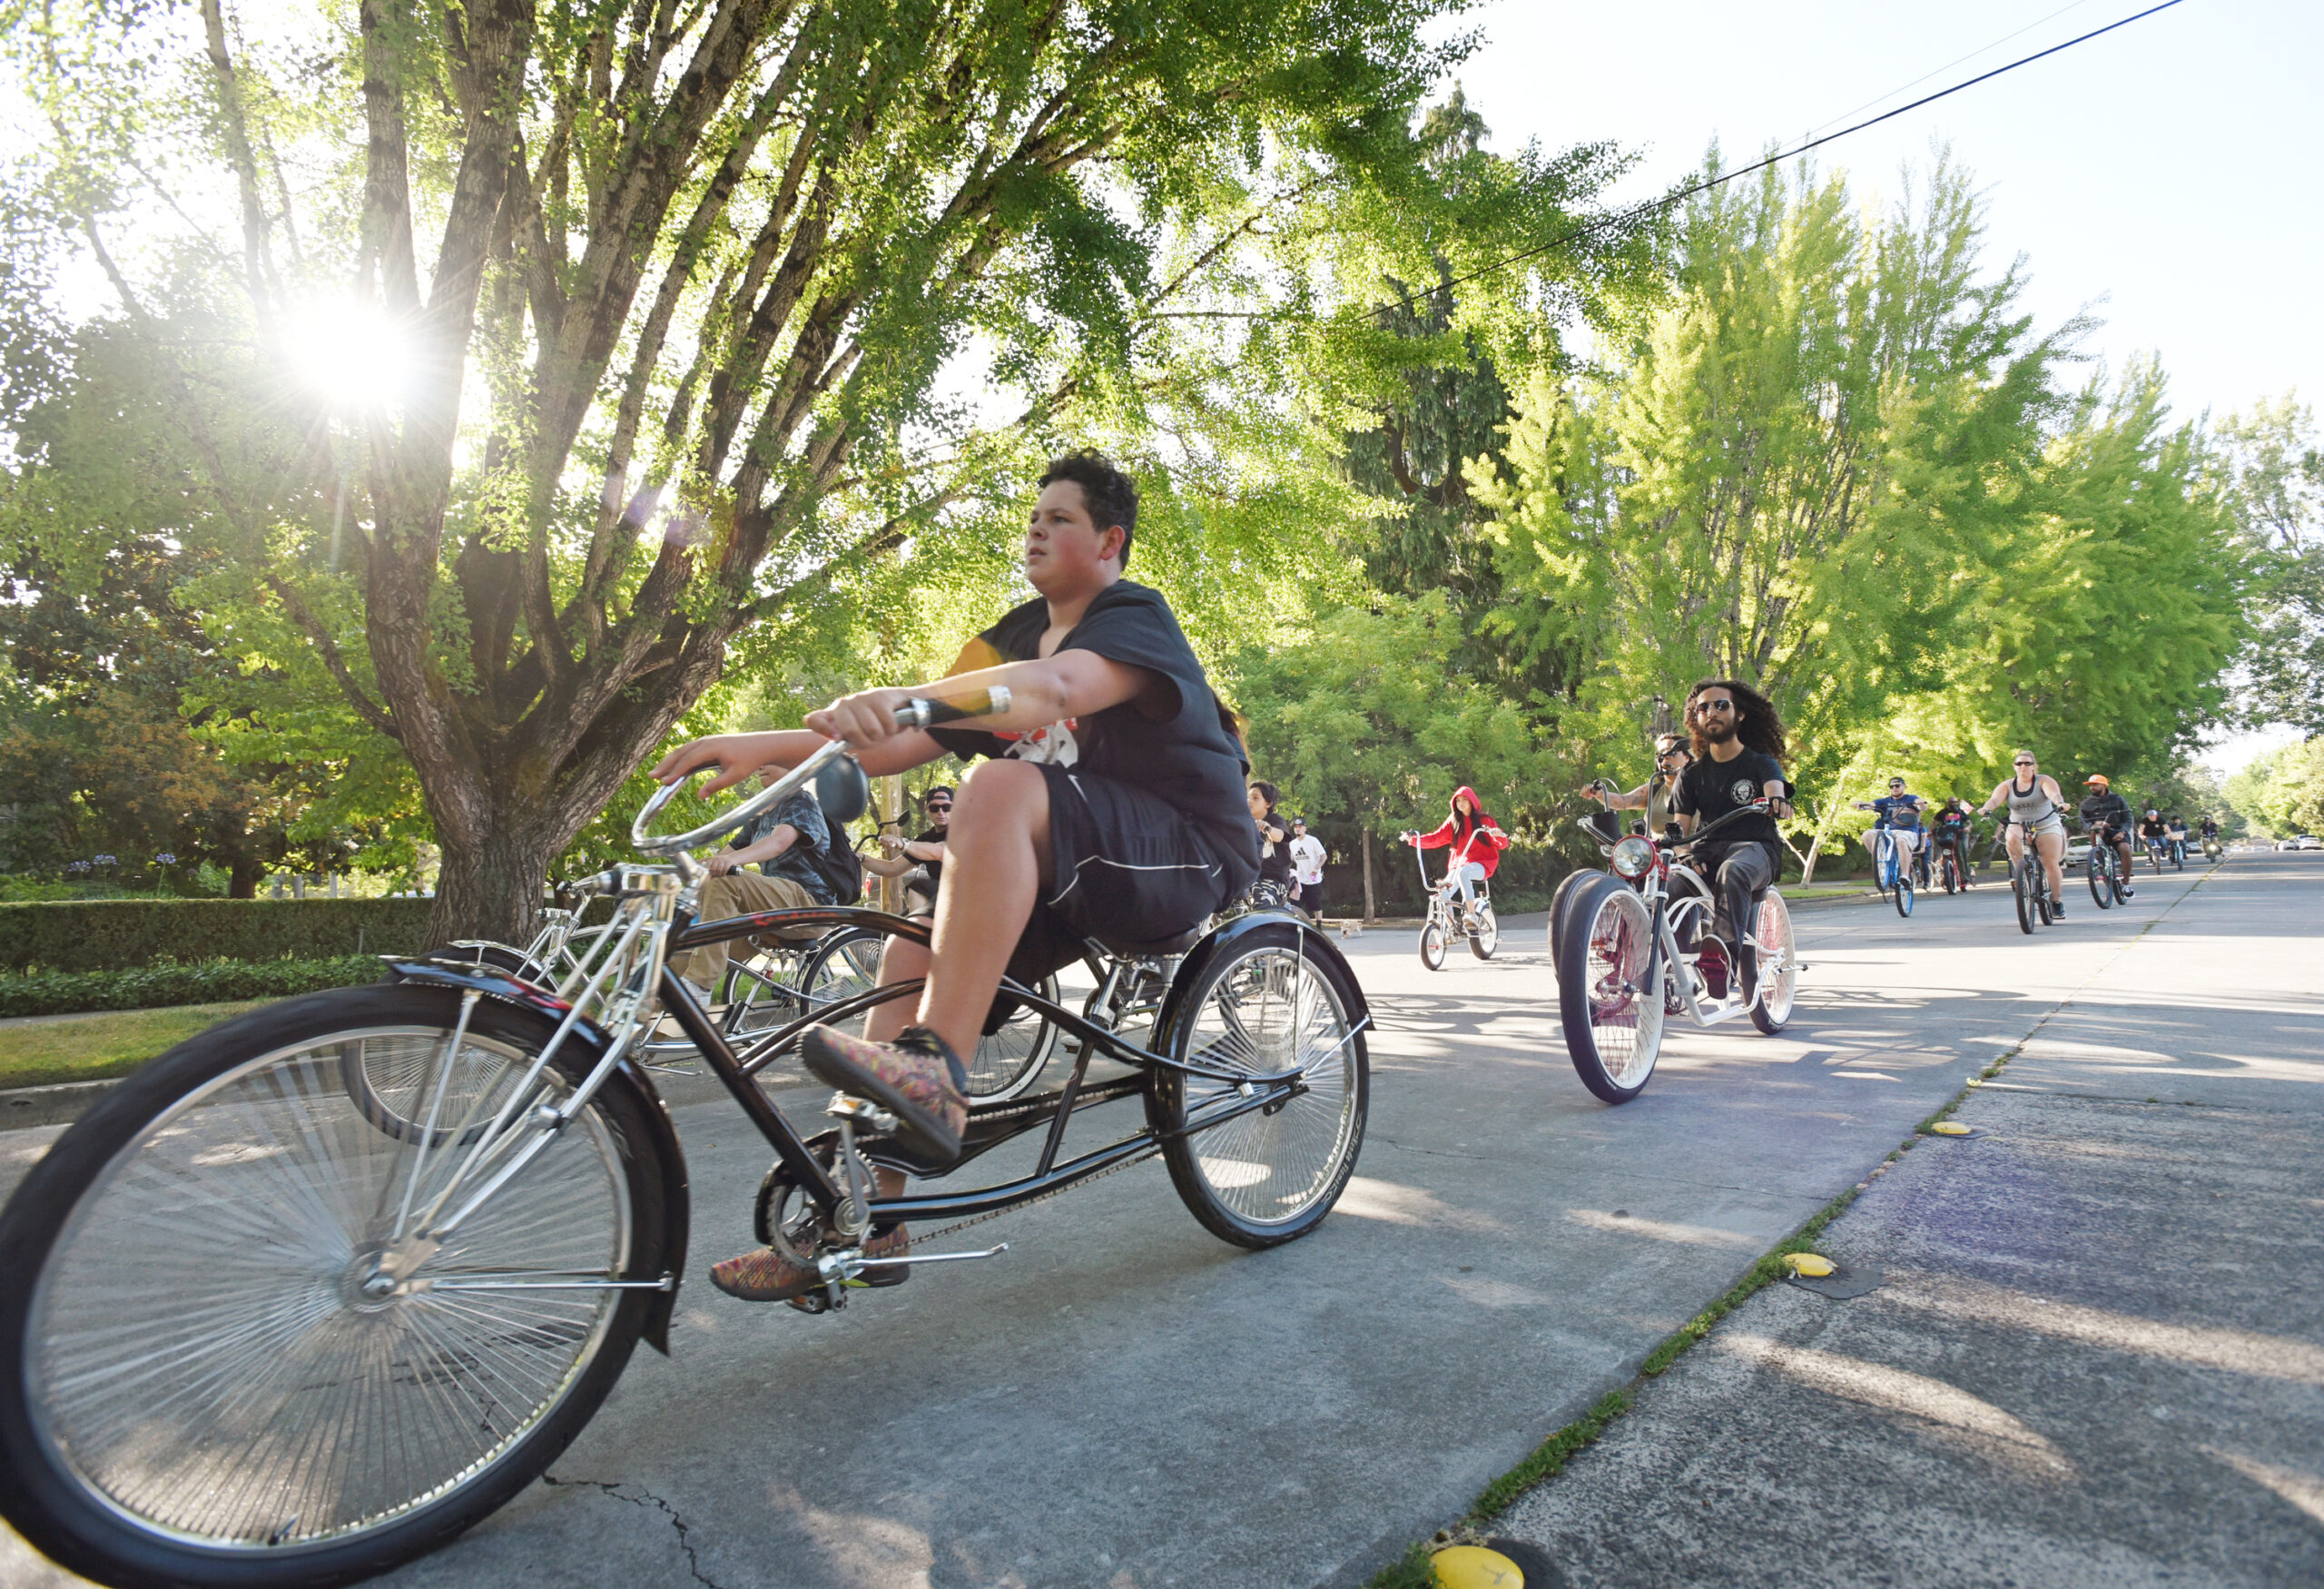 Riders heading down McDonald Avenue on their way to the taco trucks in the Roseland neighborhood during the Santa Rosa Taco Tuesday Bike Ride in Santa Rosa. (Erik Castro/For The Press Democrat)